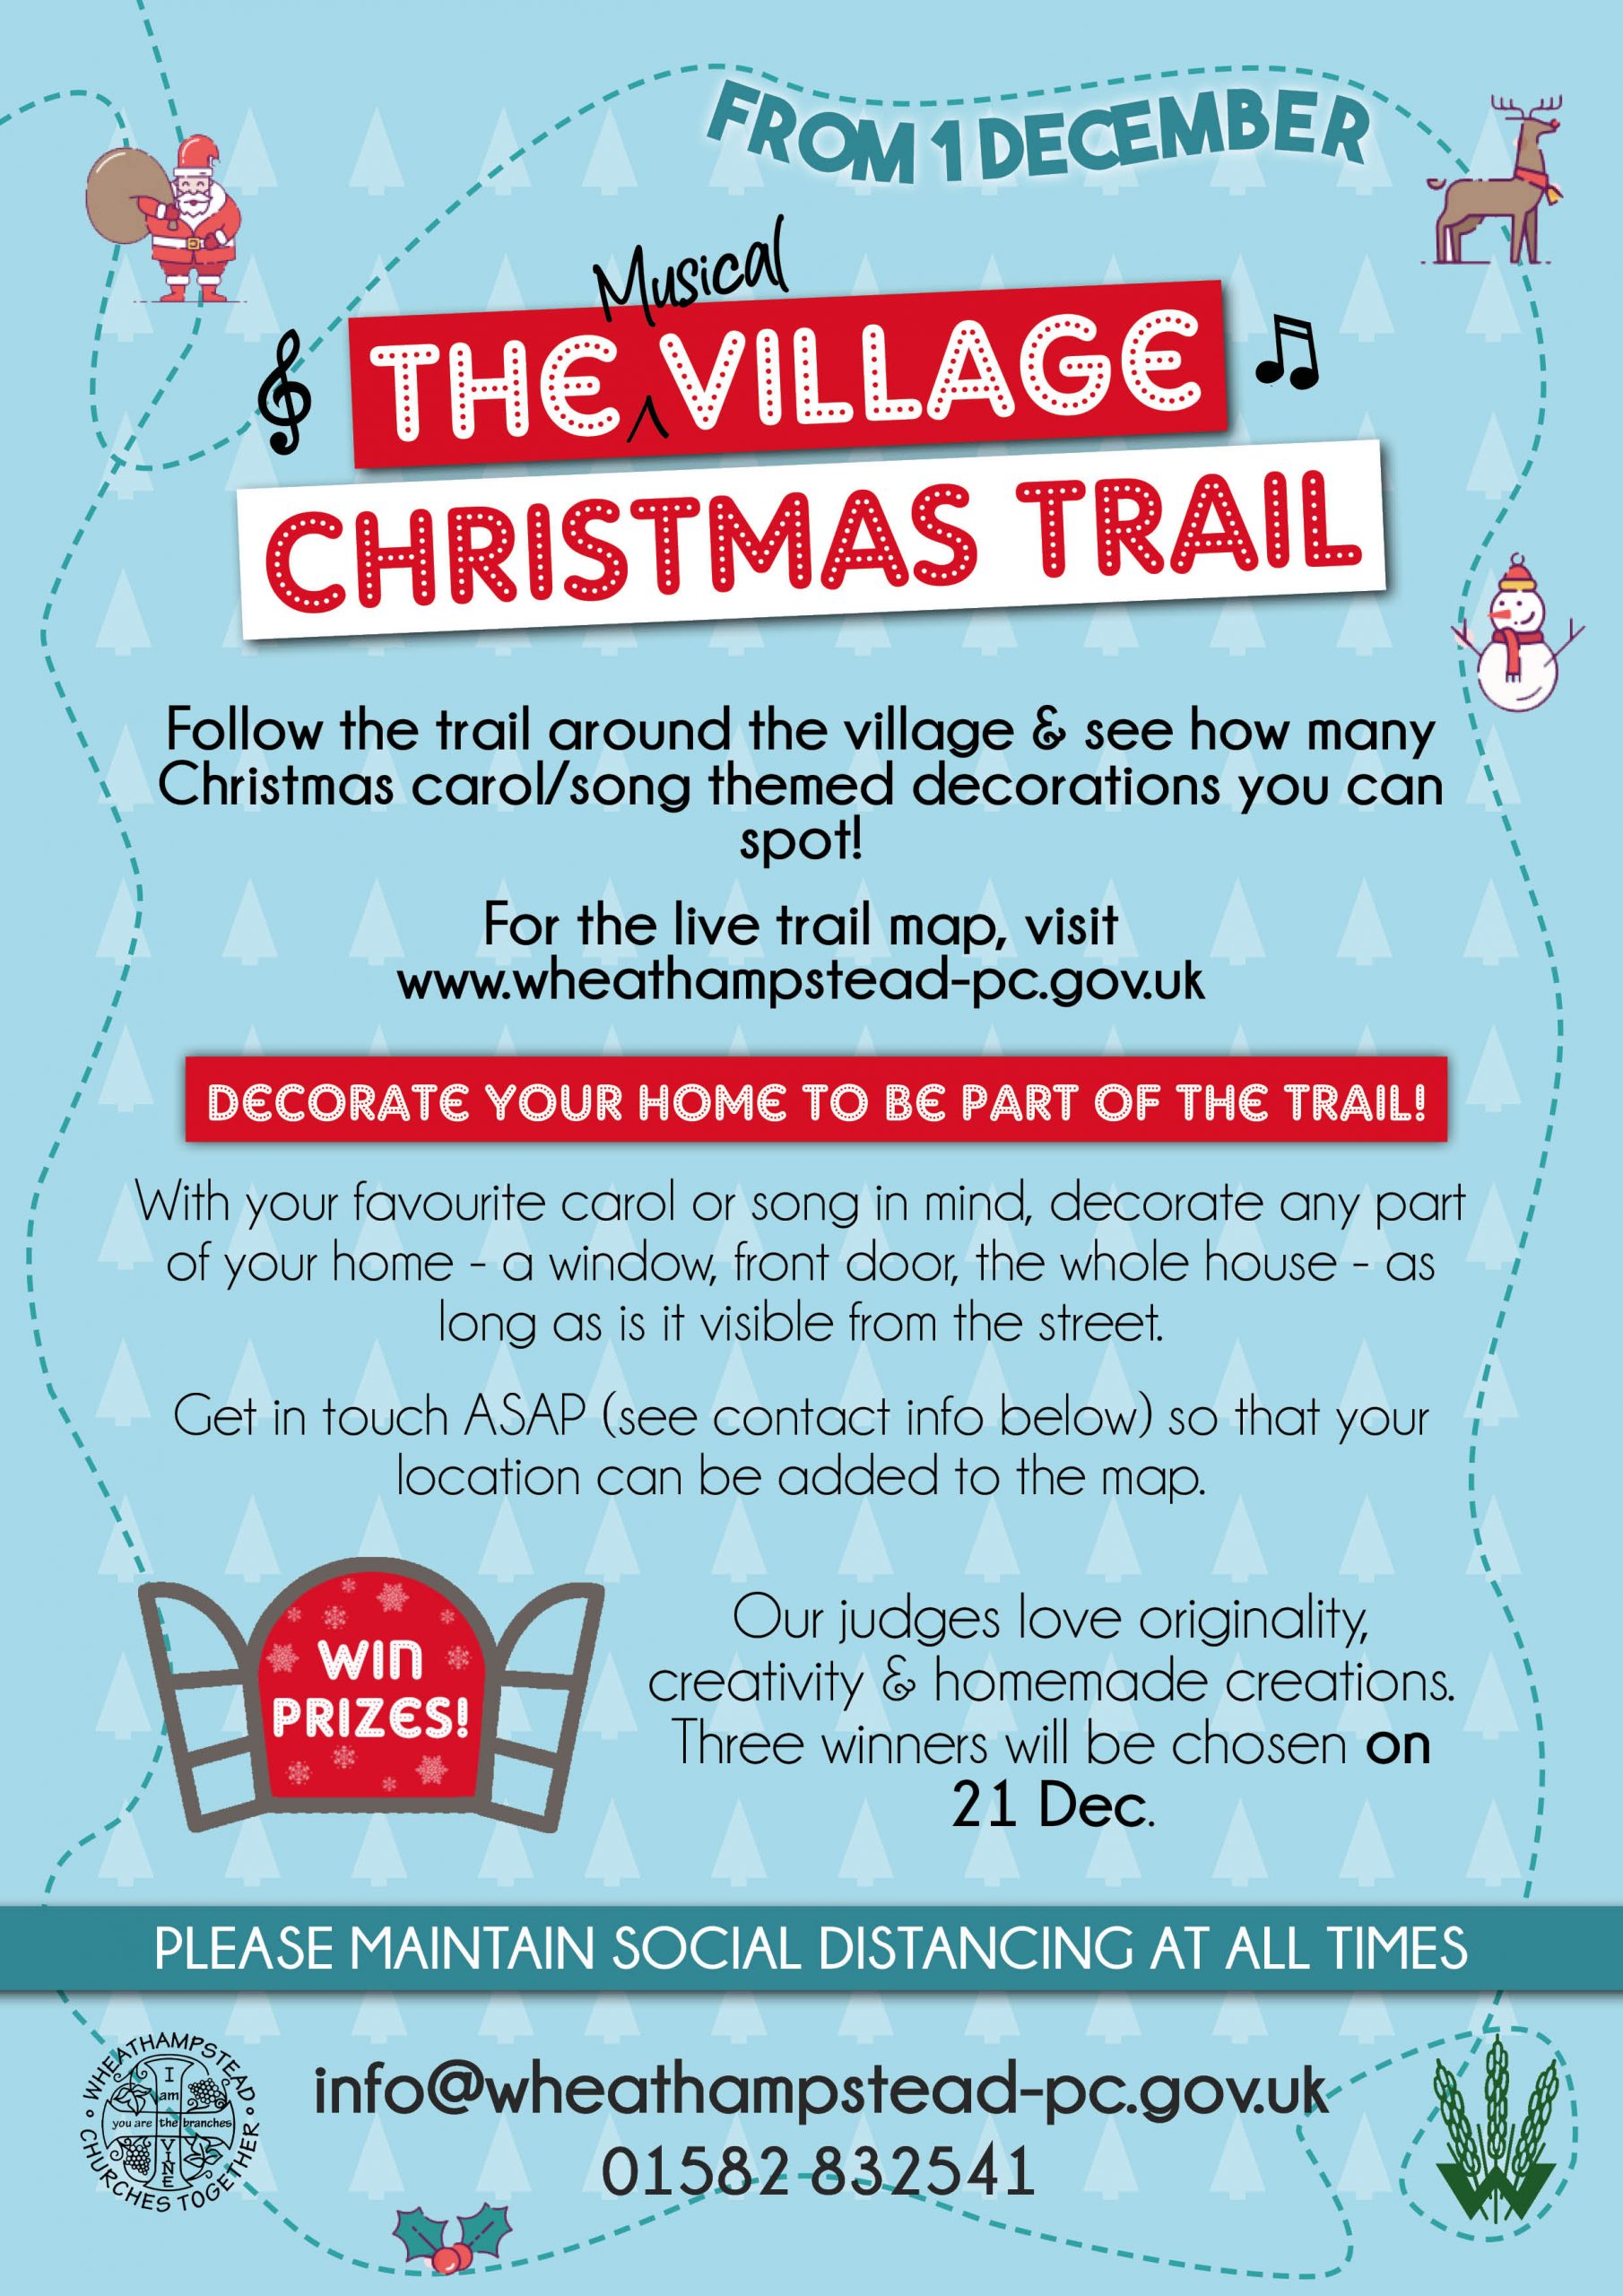 Village-Musical-Christmas-Trail-poster-web